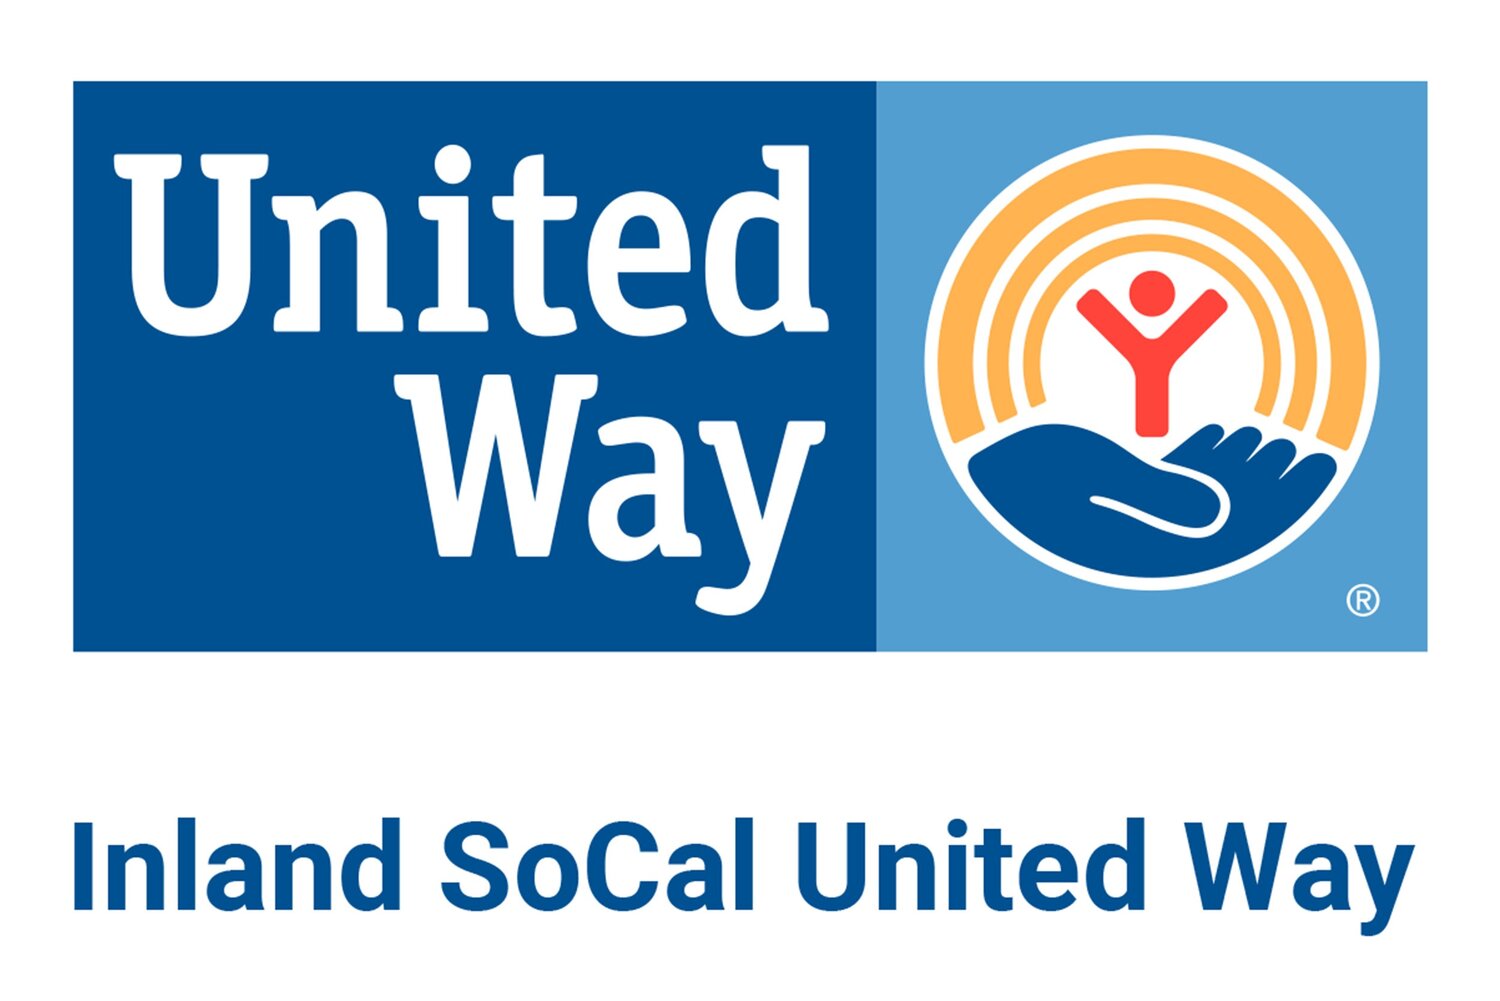 The Inland SoCal United Way recently announced a program where monthly payments will be distributed to new mothers and former foster children. (Photo: inlandsocaluw.org)